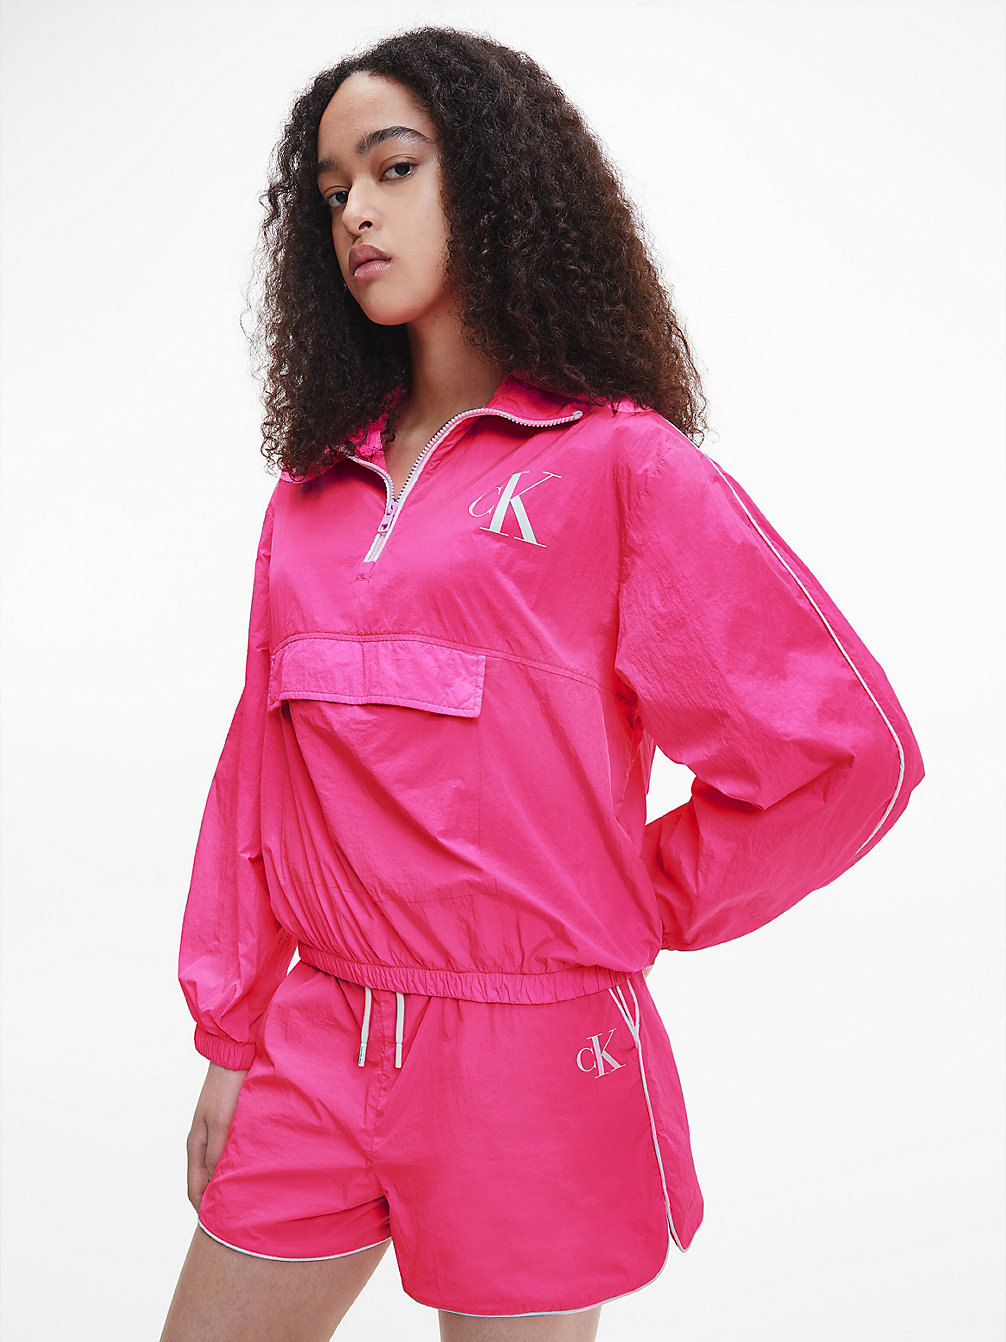 NEON PINK Giacca A Vento In Nylon Taglio Relaxed undefined donna Calvin Klein